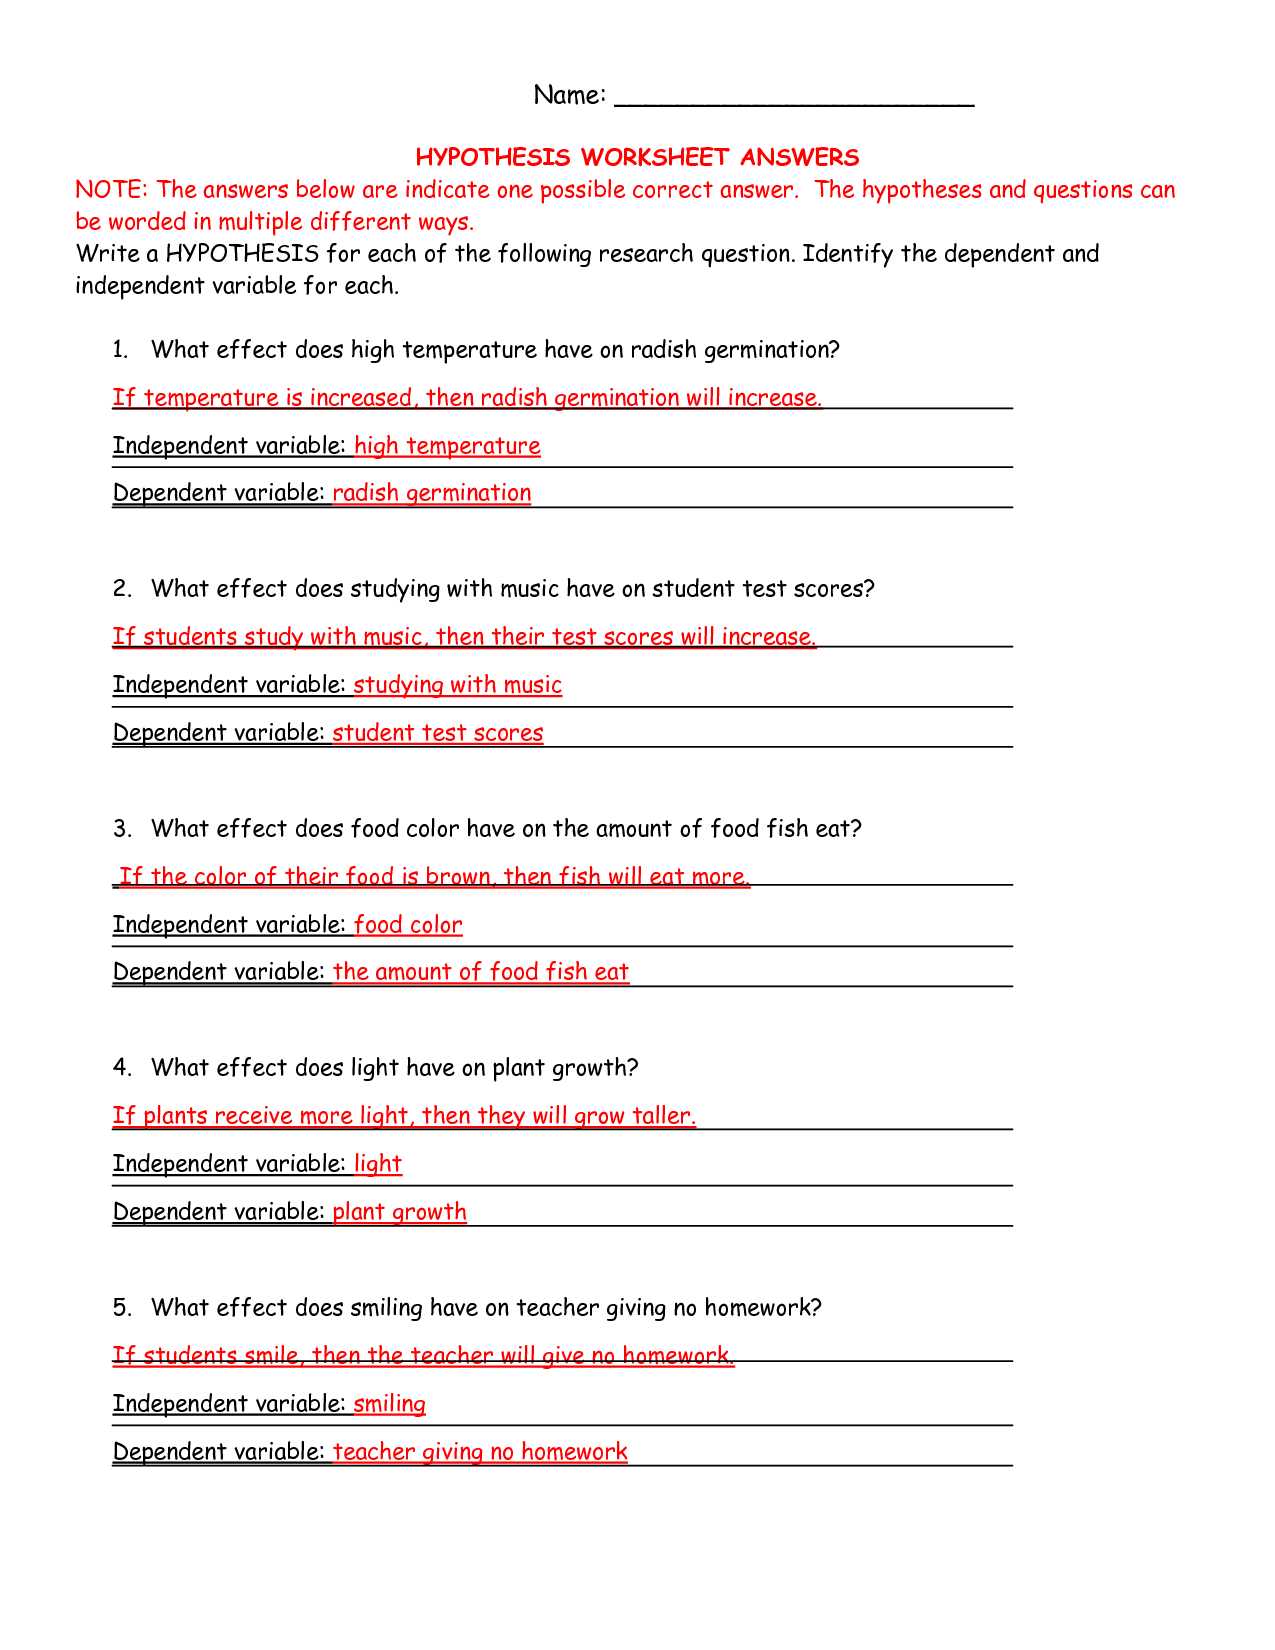 Dna Replication Practice Worksheet Answers or Ag Science Hypothesis Worksheet Answers Curriculum